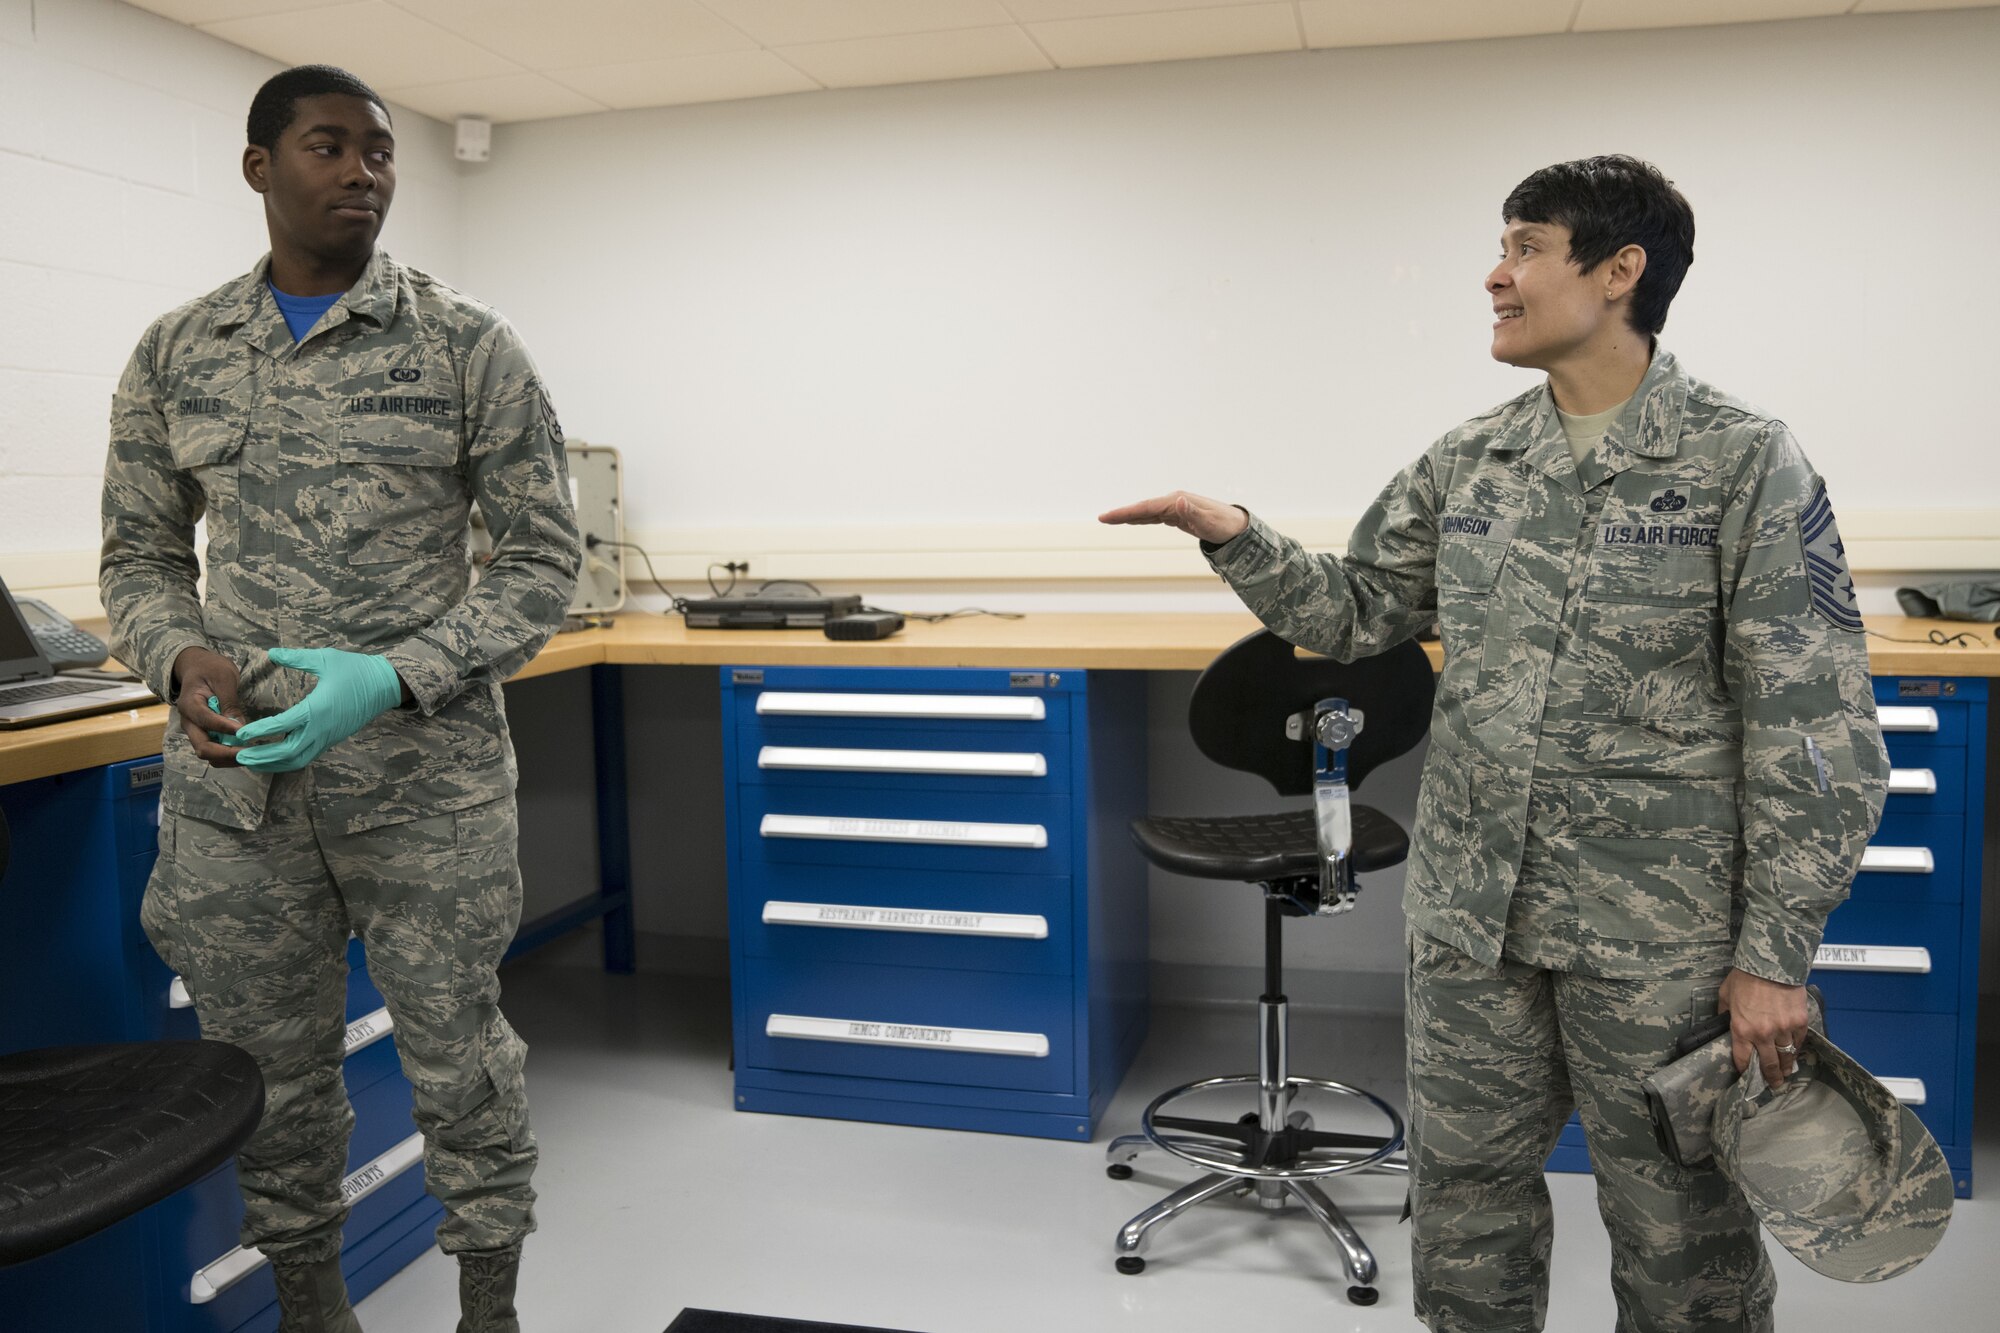 Chief Master Sgt. Imelda Johnson, 22nd Air Force command chief, discusses career progression with Senior Airman Khalil Smalls, 339th Flight Test Squadron aircrew flight equipment helper, Feb. 2, 2018, at Robins Air Force Base, Georgia. Smalls is the lowest ranking individual in his unit and will soon begin Airman Leadership School, the first level of the Enlisted Professional Military Education. (U.S. Air Force photo by Jamal D. Sutter)